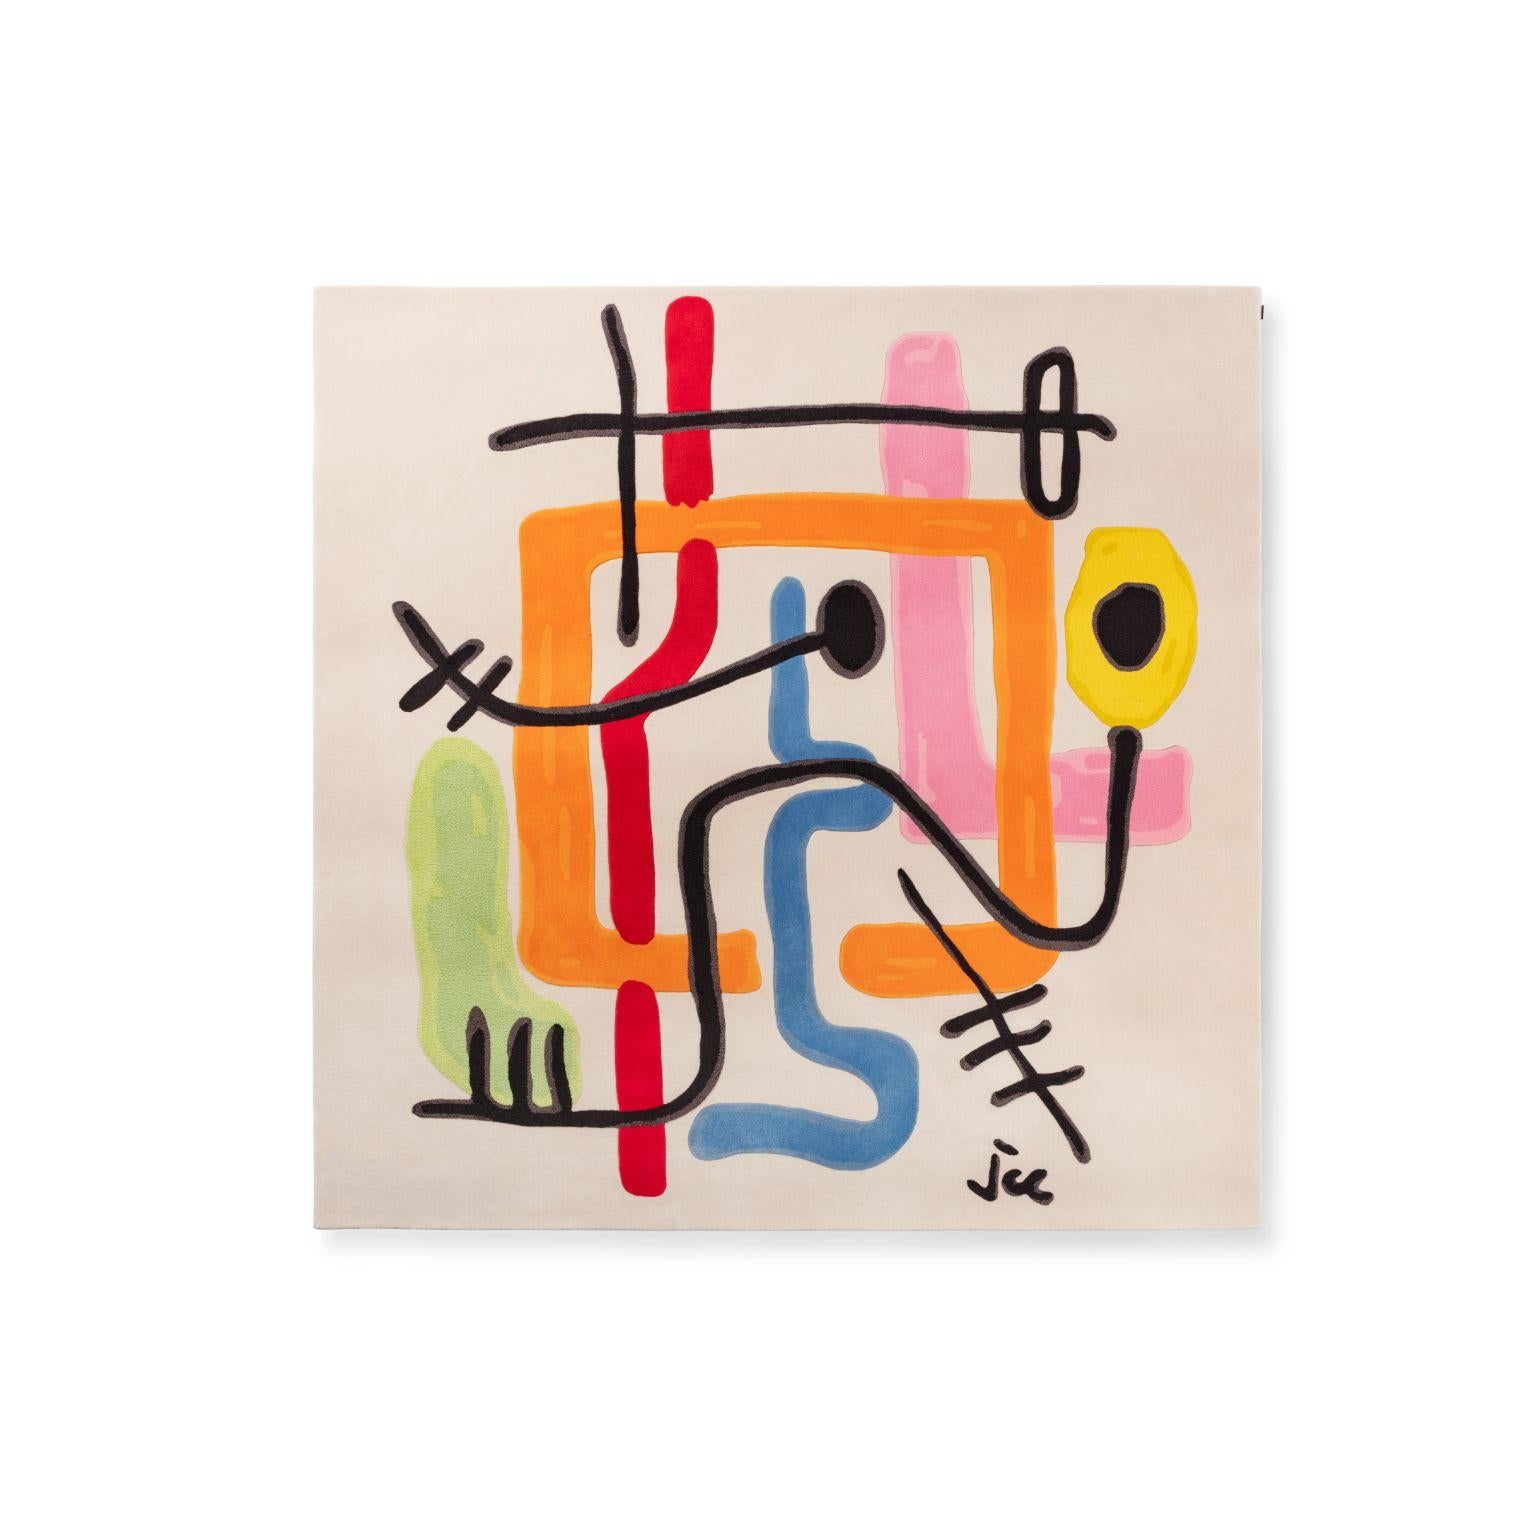 Candy Darling Rug by Jean-Charles de Castelbajac For Sale 1